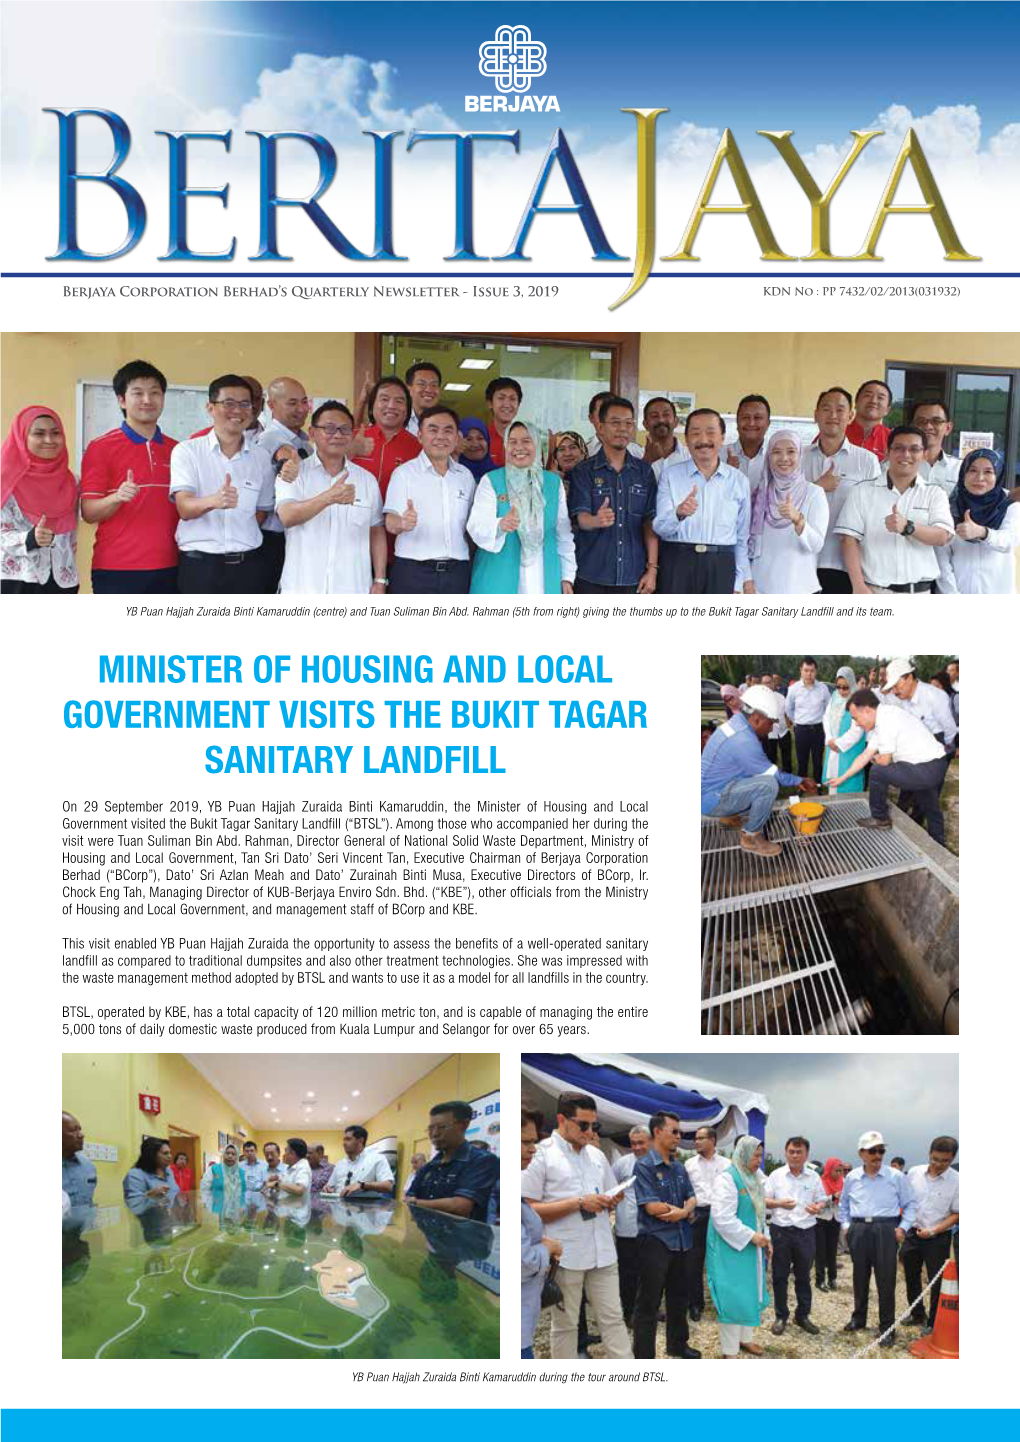 Minister of Housing and Local Government Visits the Bukit Tagar Sanitary Landfill